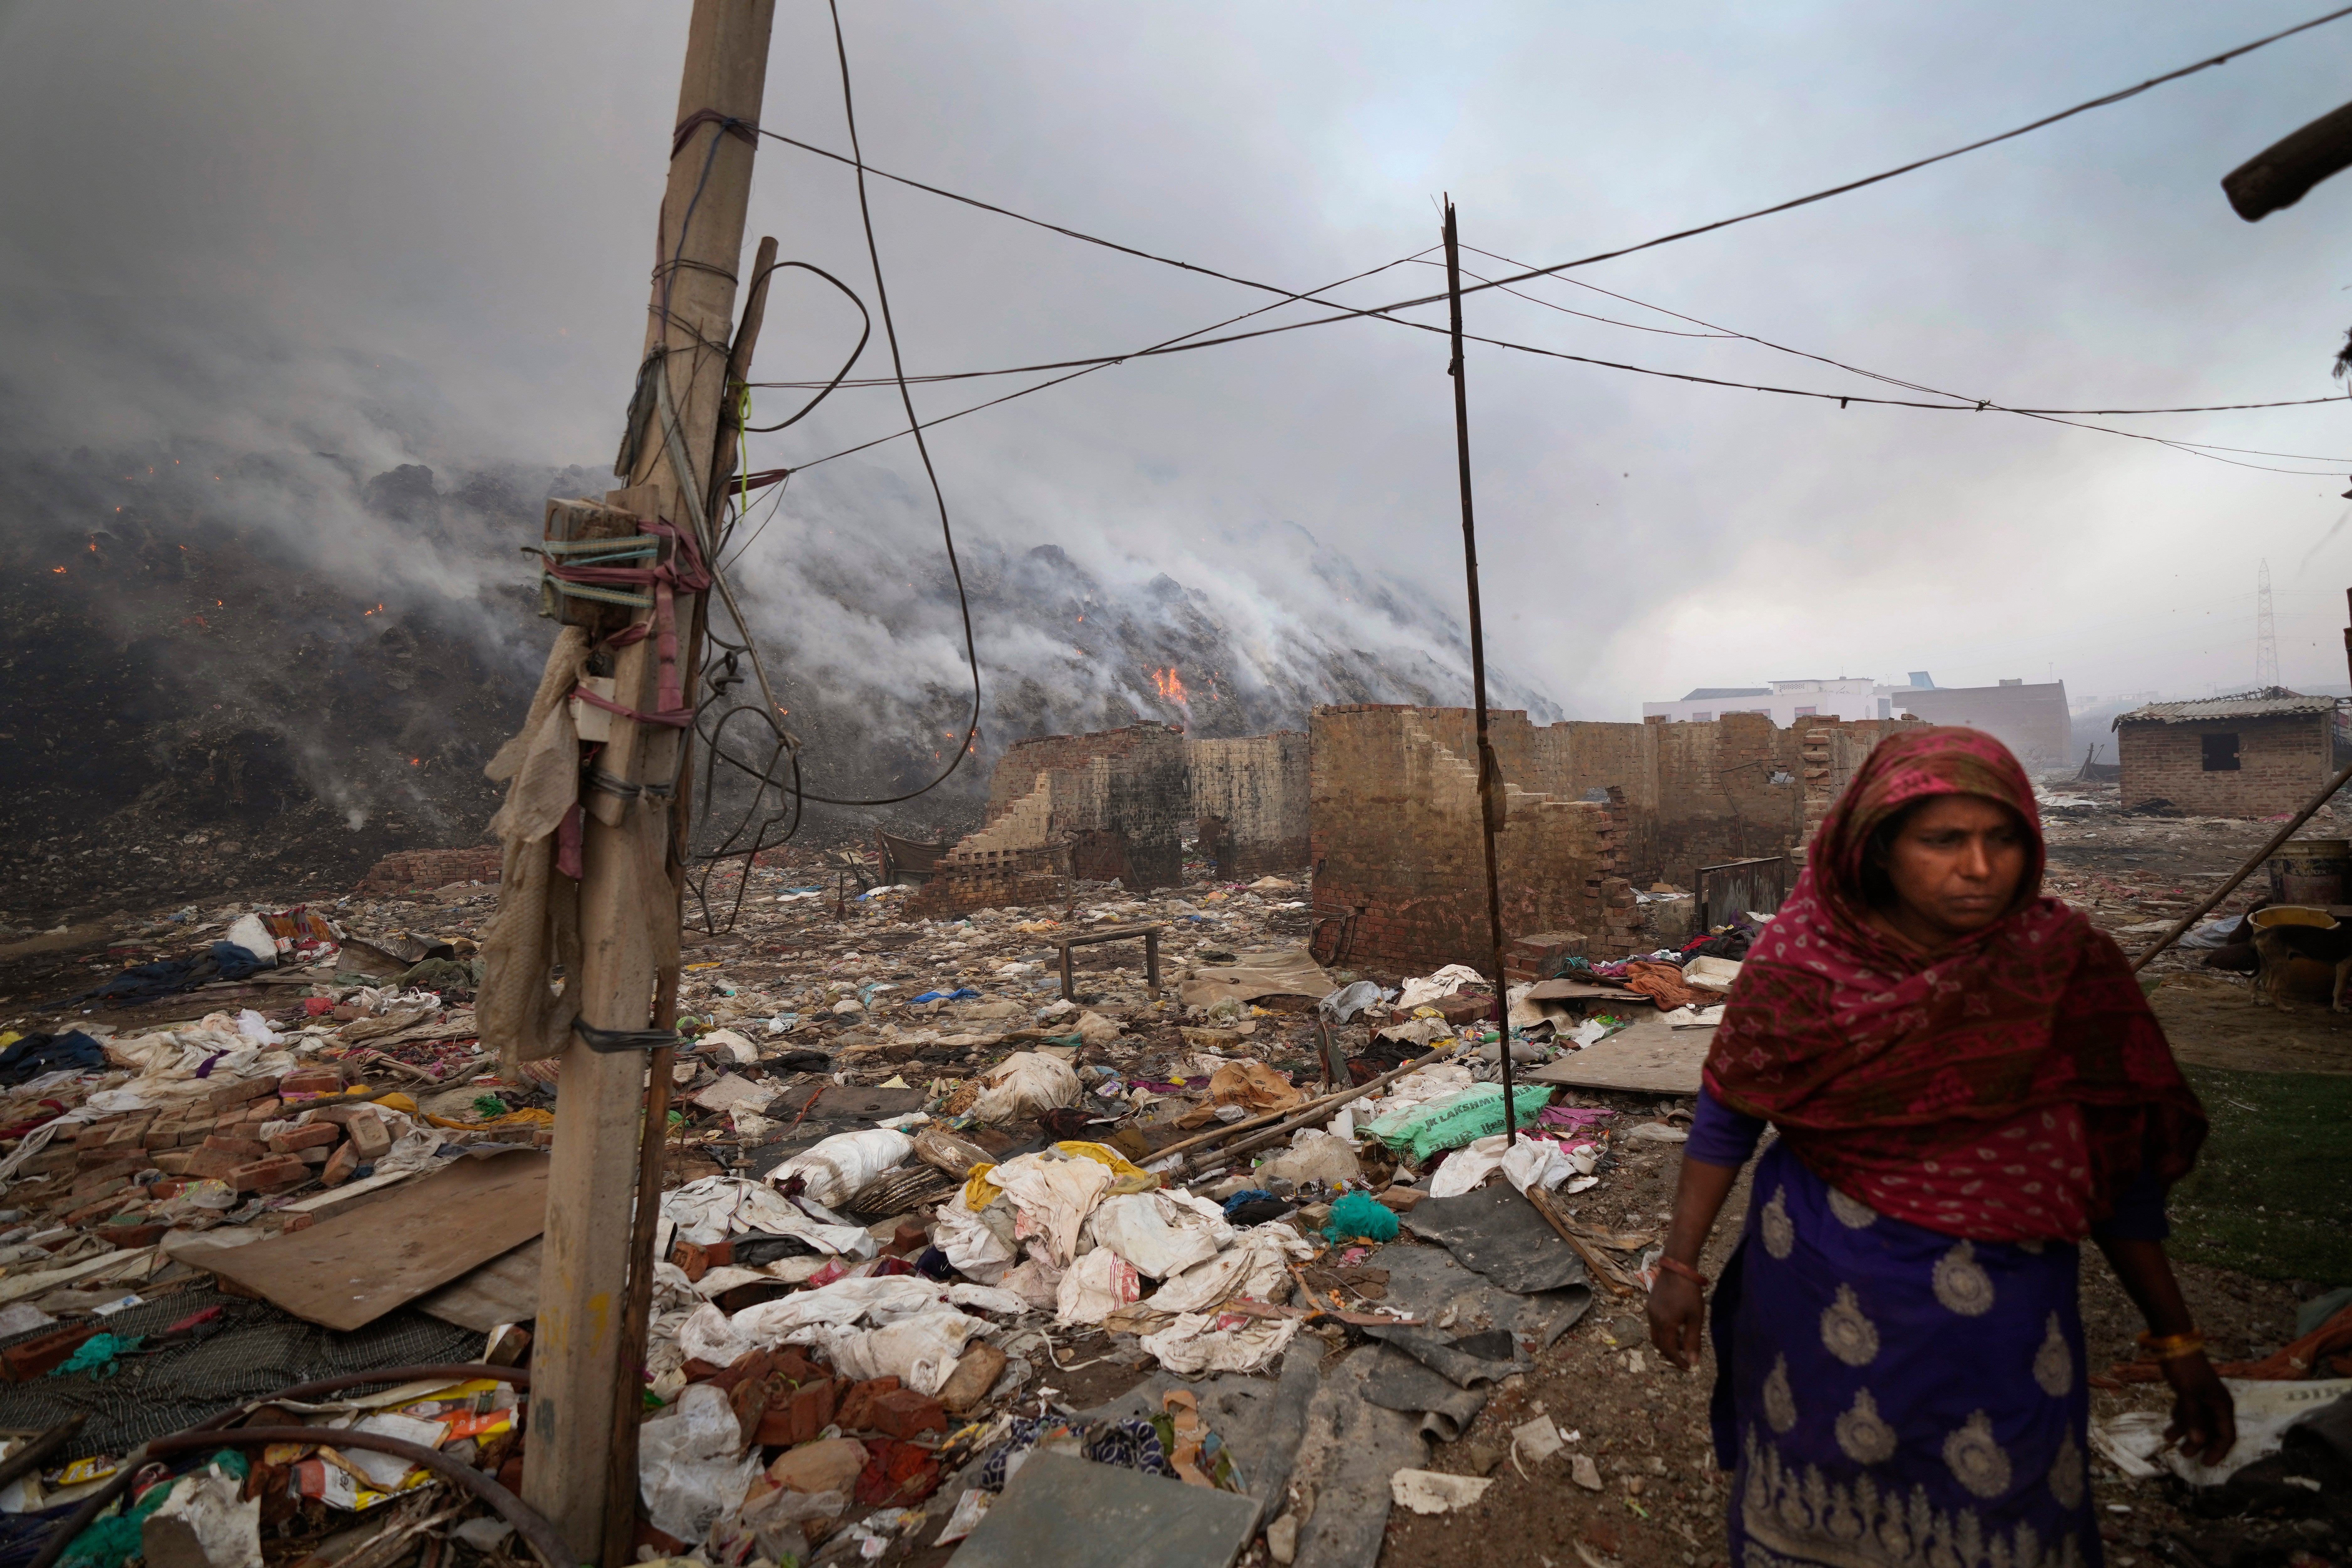 A woman stands near the edge of the landfill. (Photo: Manish Swarup, AP)